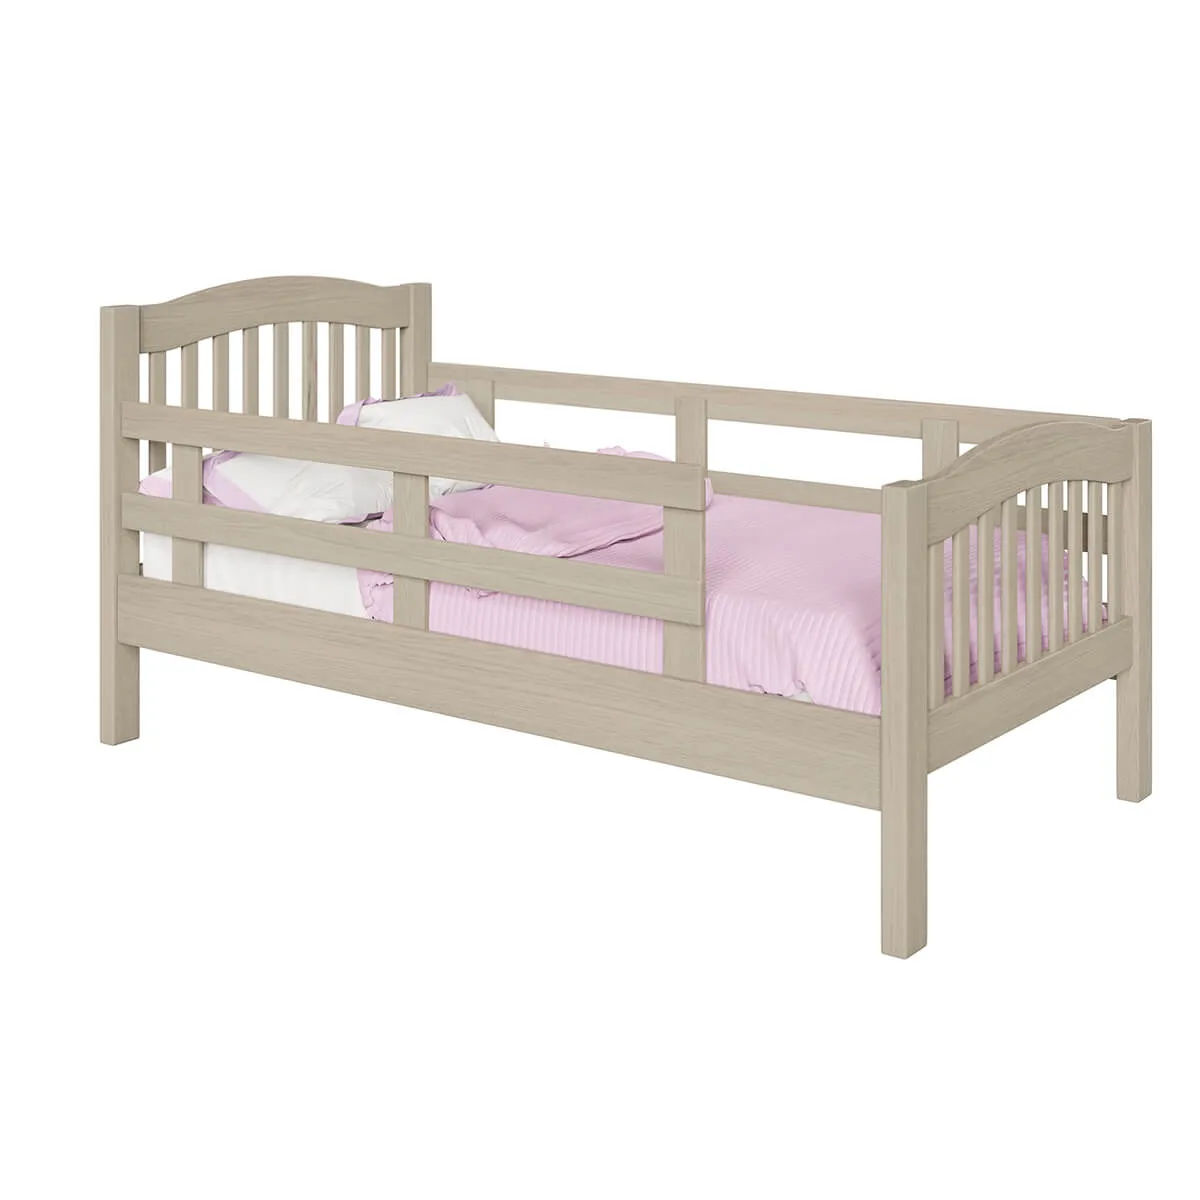 Allexas Single Bed with Side Rail